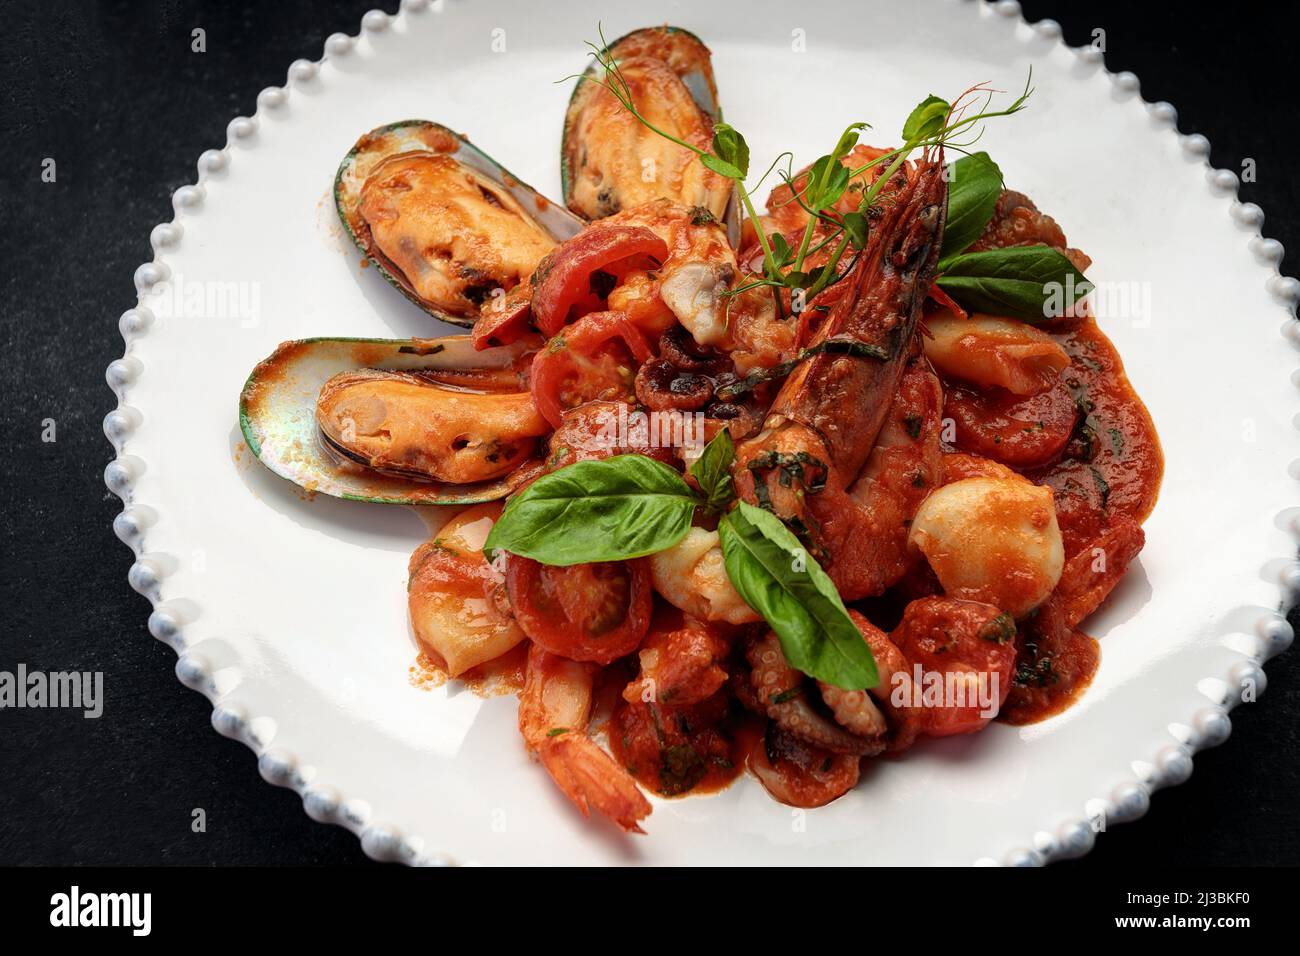 Sauteed seafood with shrimps, mussels, squid and scallop on a white plate, on a dark background Stock Photo